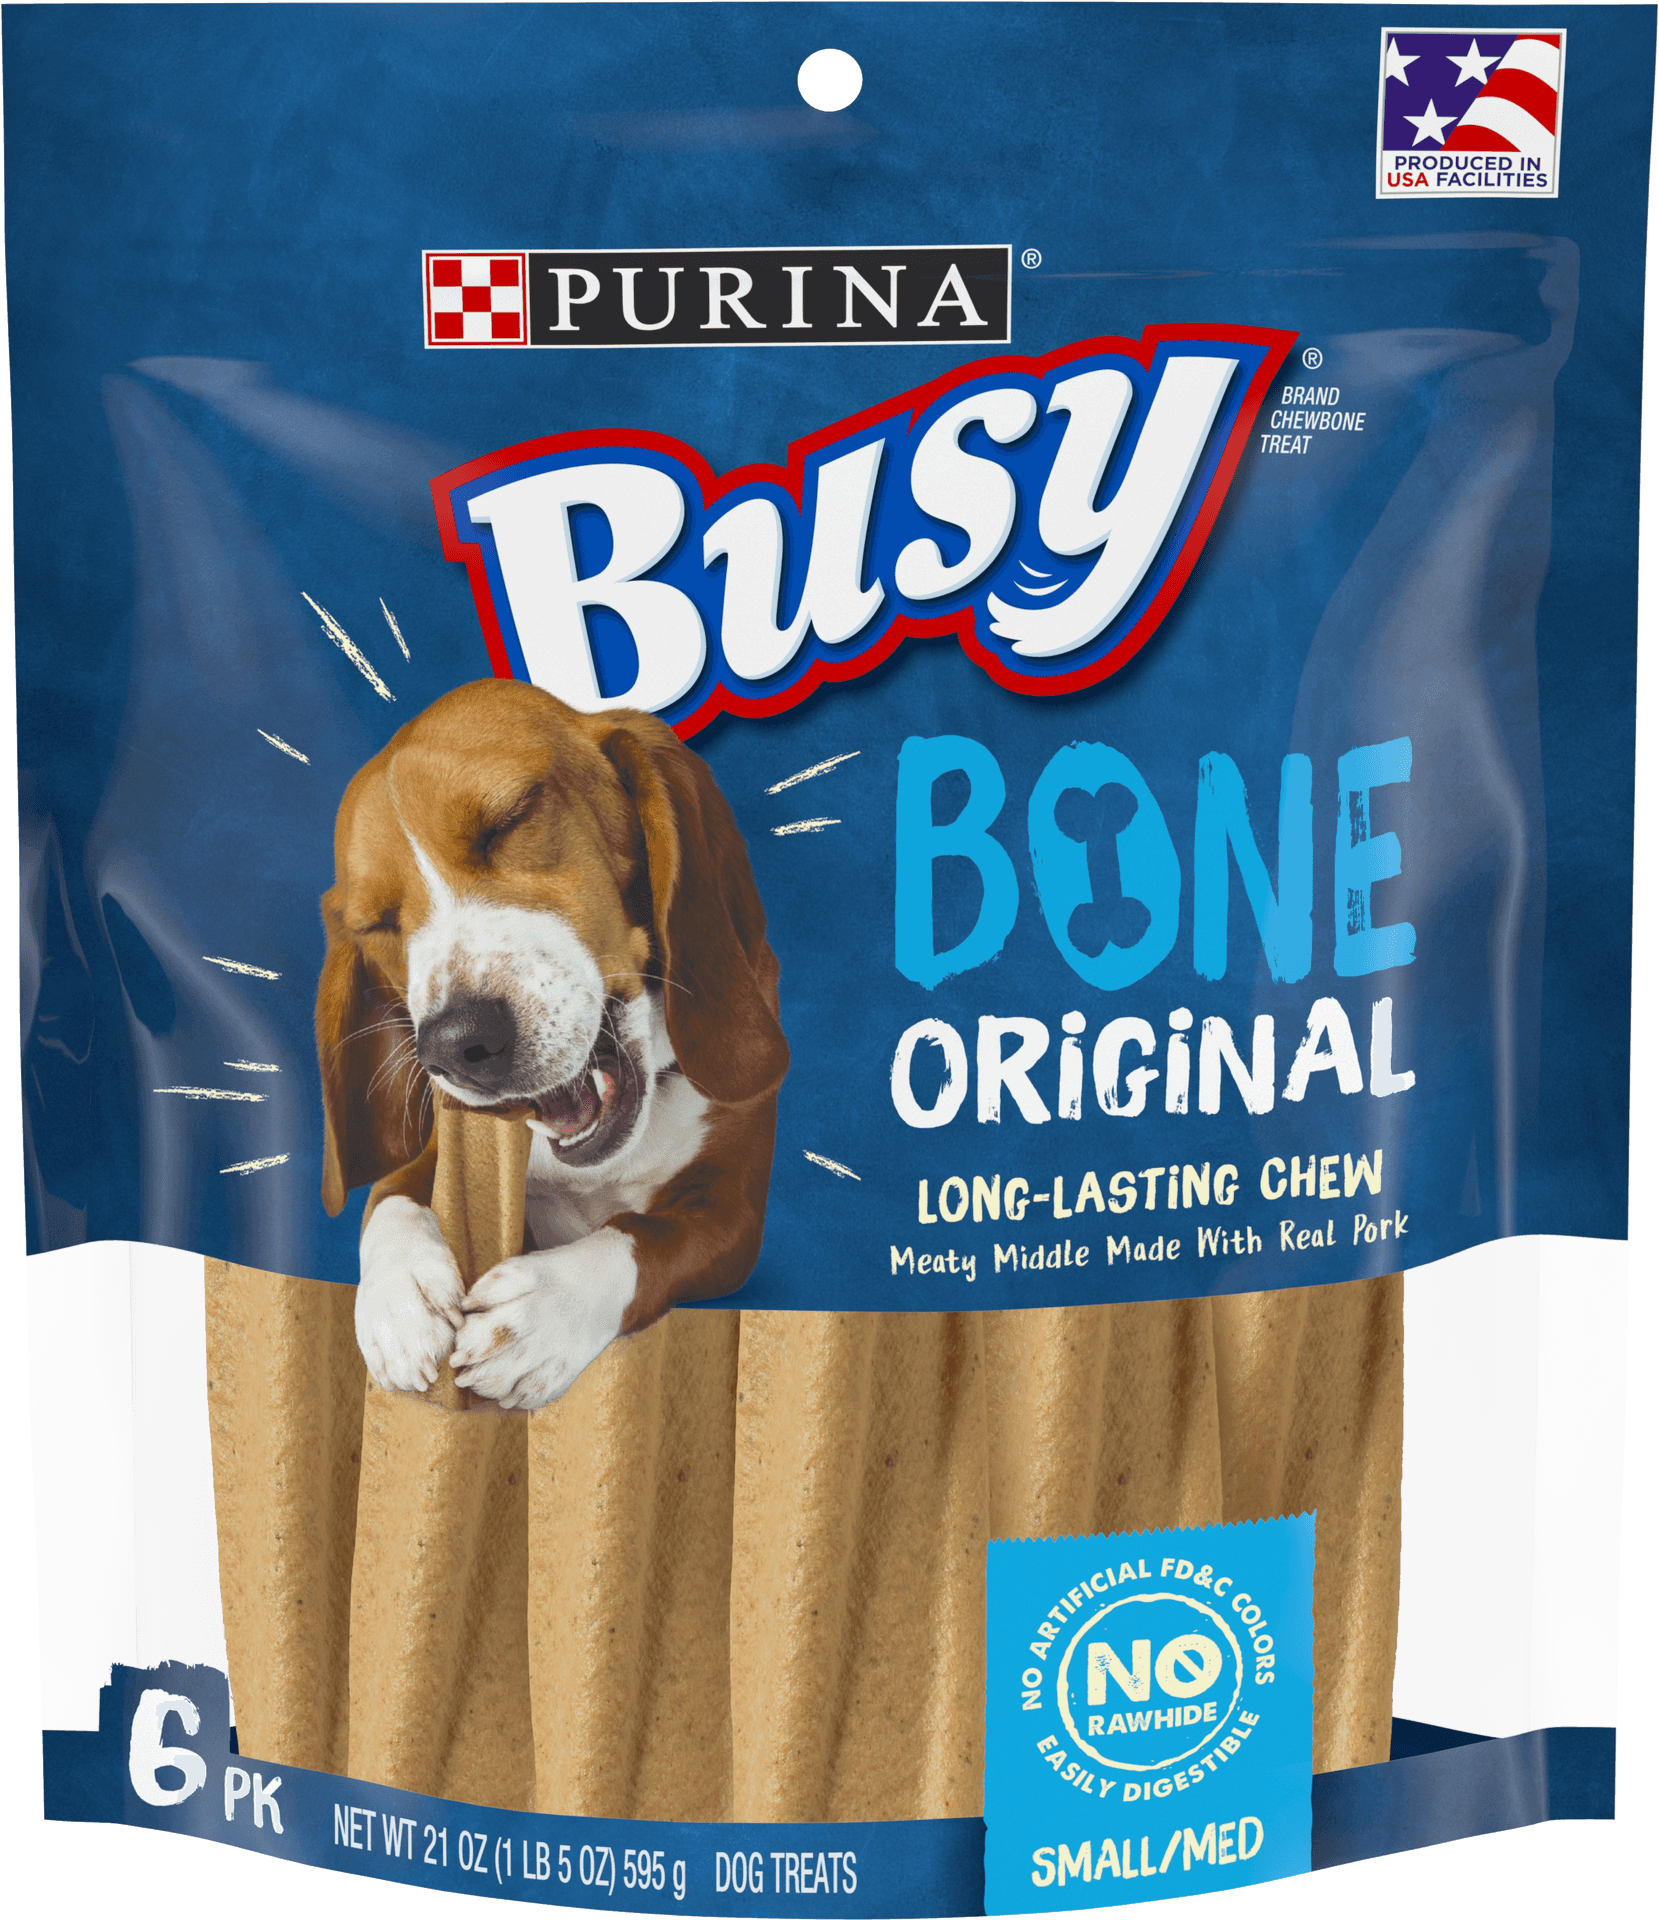 Purina Busy Bone Dog Treats Package PNG